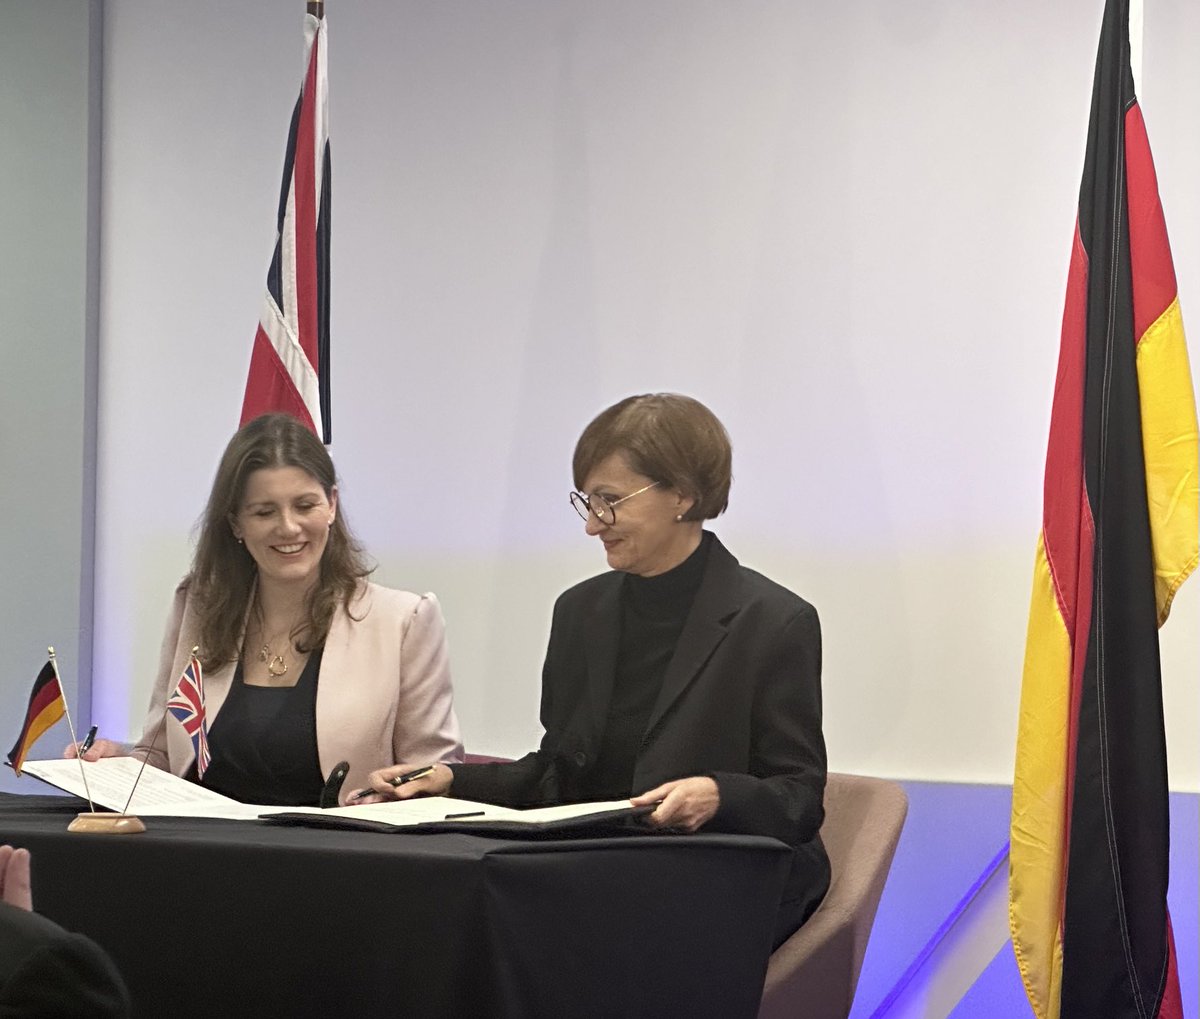 Great to be part of the German-UK ministerial dialogue on science and innovation. Lots to discuss and collaborate on between the two countries, in particular in quantum tech, AI and battery tech. ⁦@innovateuk⁩ ⁦@SciTechgovuk⁩ ⁦@GermanEmbassy⁩